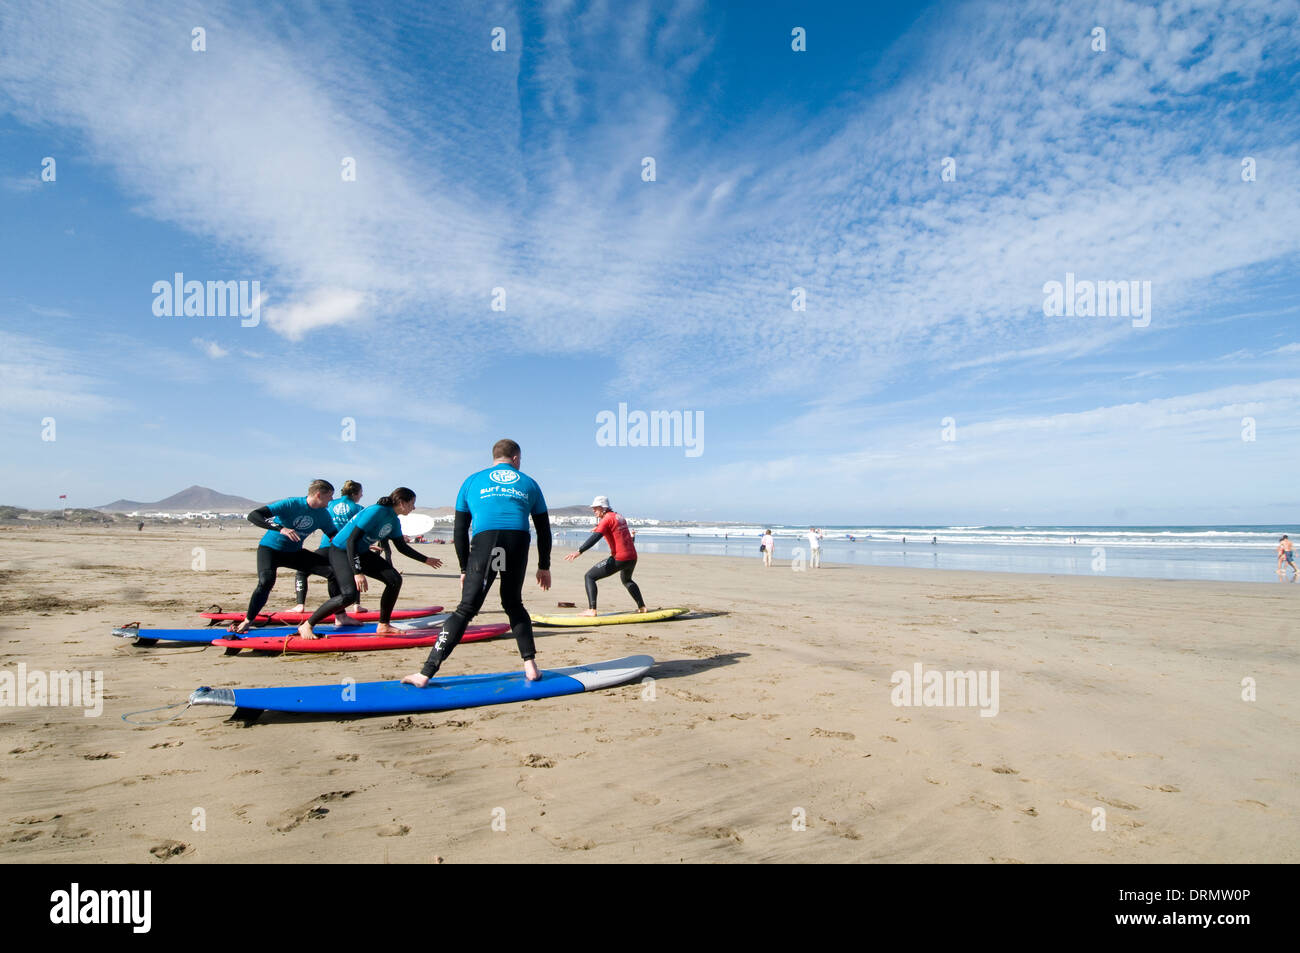 surfing lesson lessons learning to stand up on surf board boards surfboards beach playa famara lanzarote beach beaches canary is Stock Photo